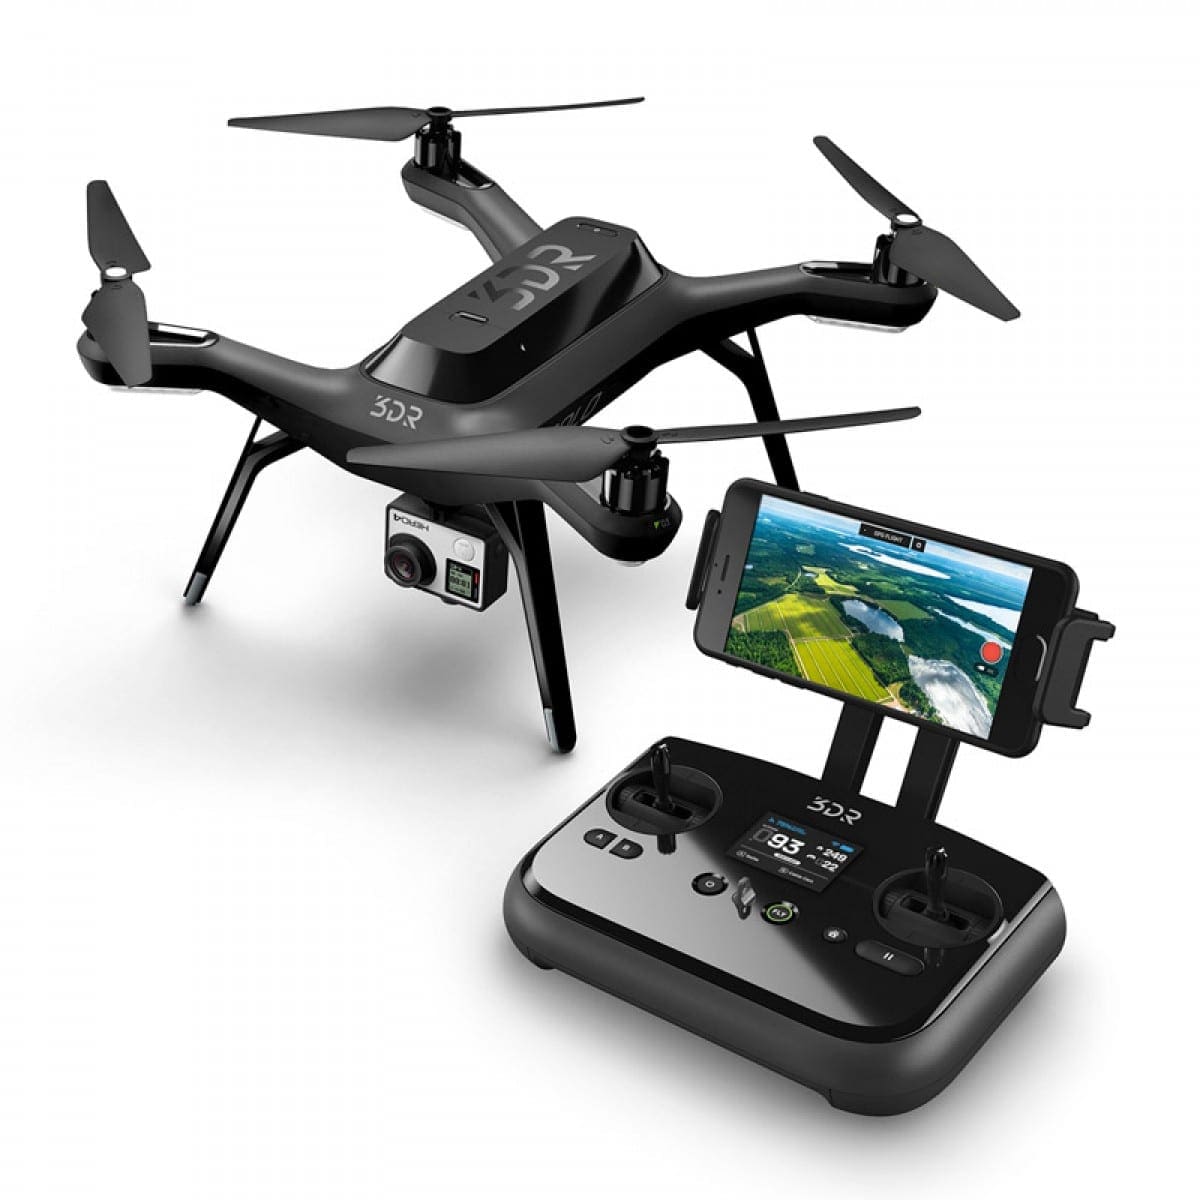 3DR Solo Drone video package